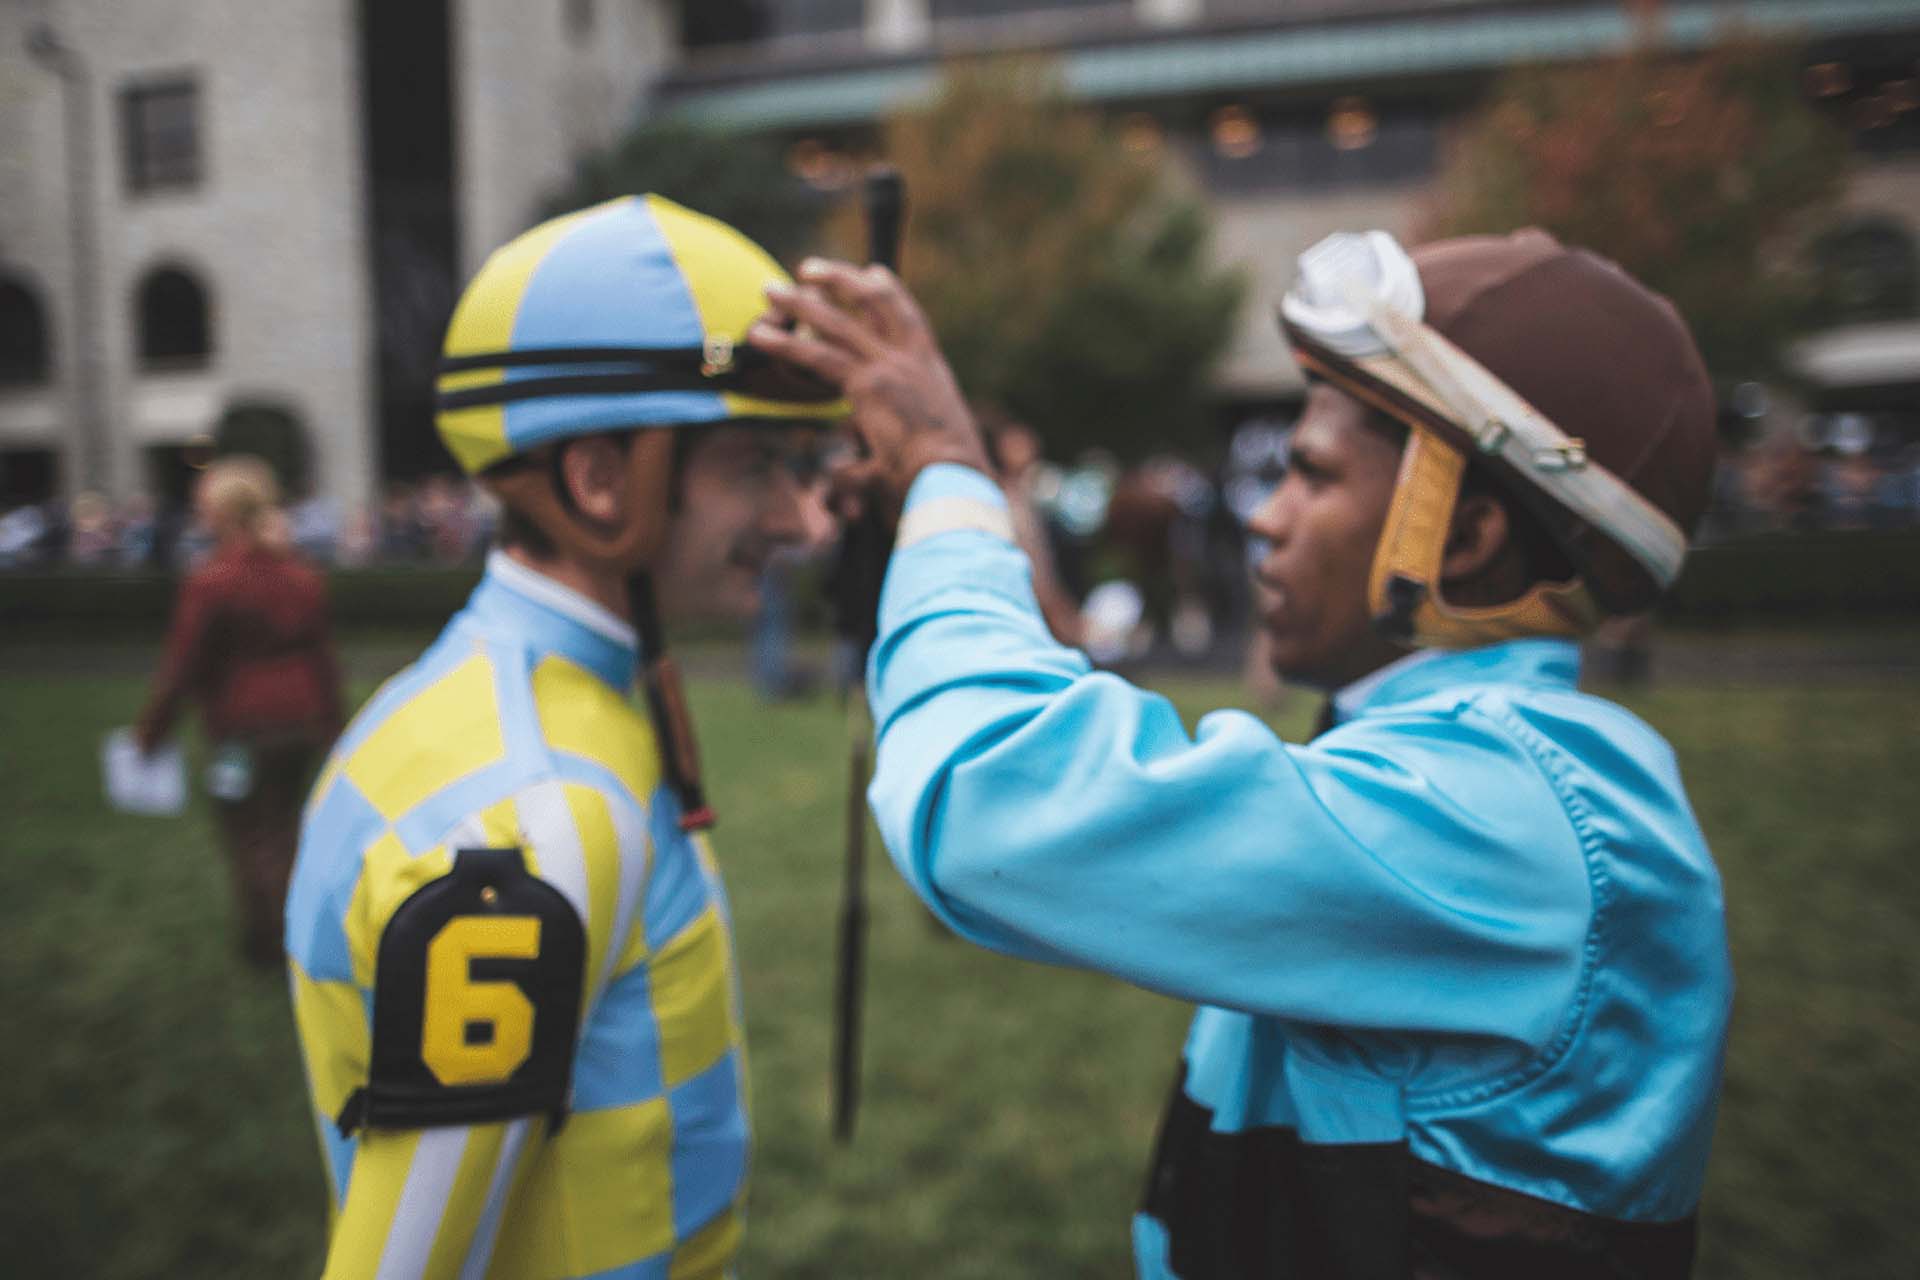 A candid photo of a jockey (right) adjusting the goggles of his fellow jockey (left).